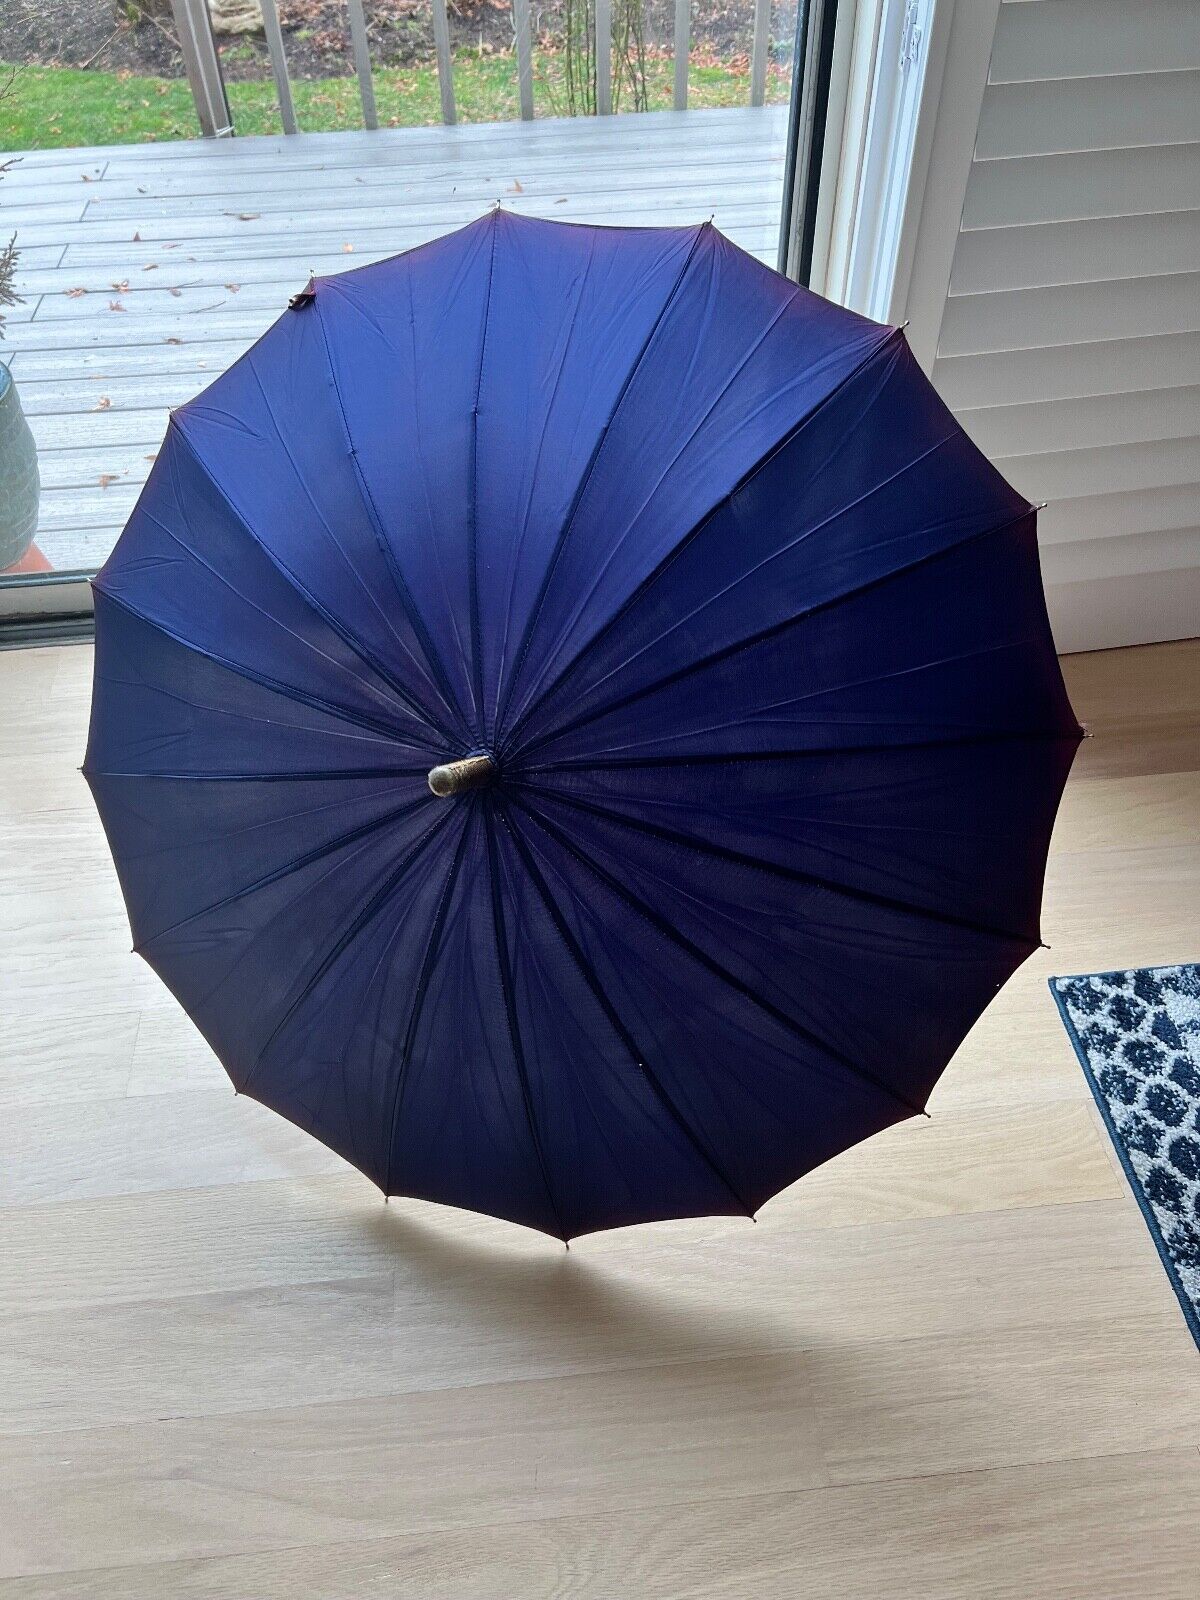 Vintage Purple/blue Umbrella Parasol With gold handle and trim with cover & loop